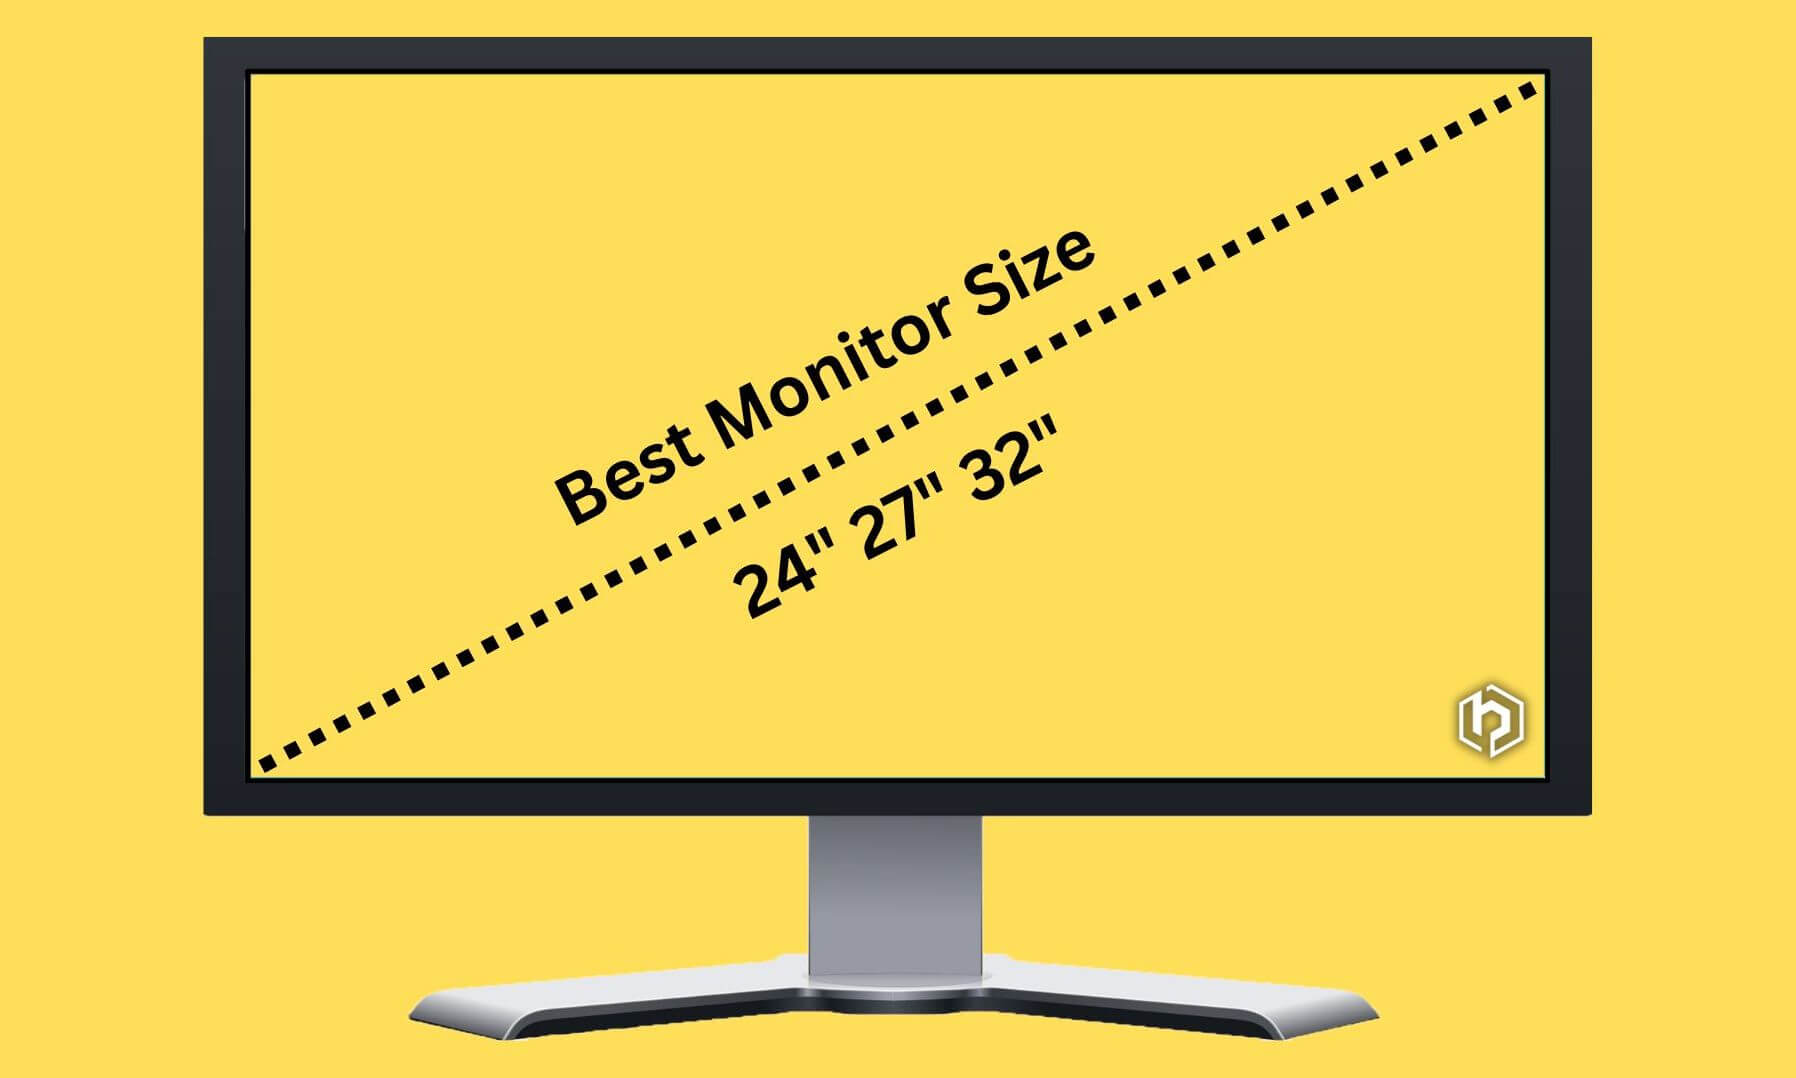 What is the Best Monitor Size